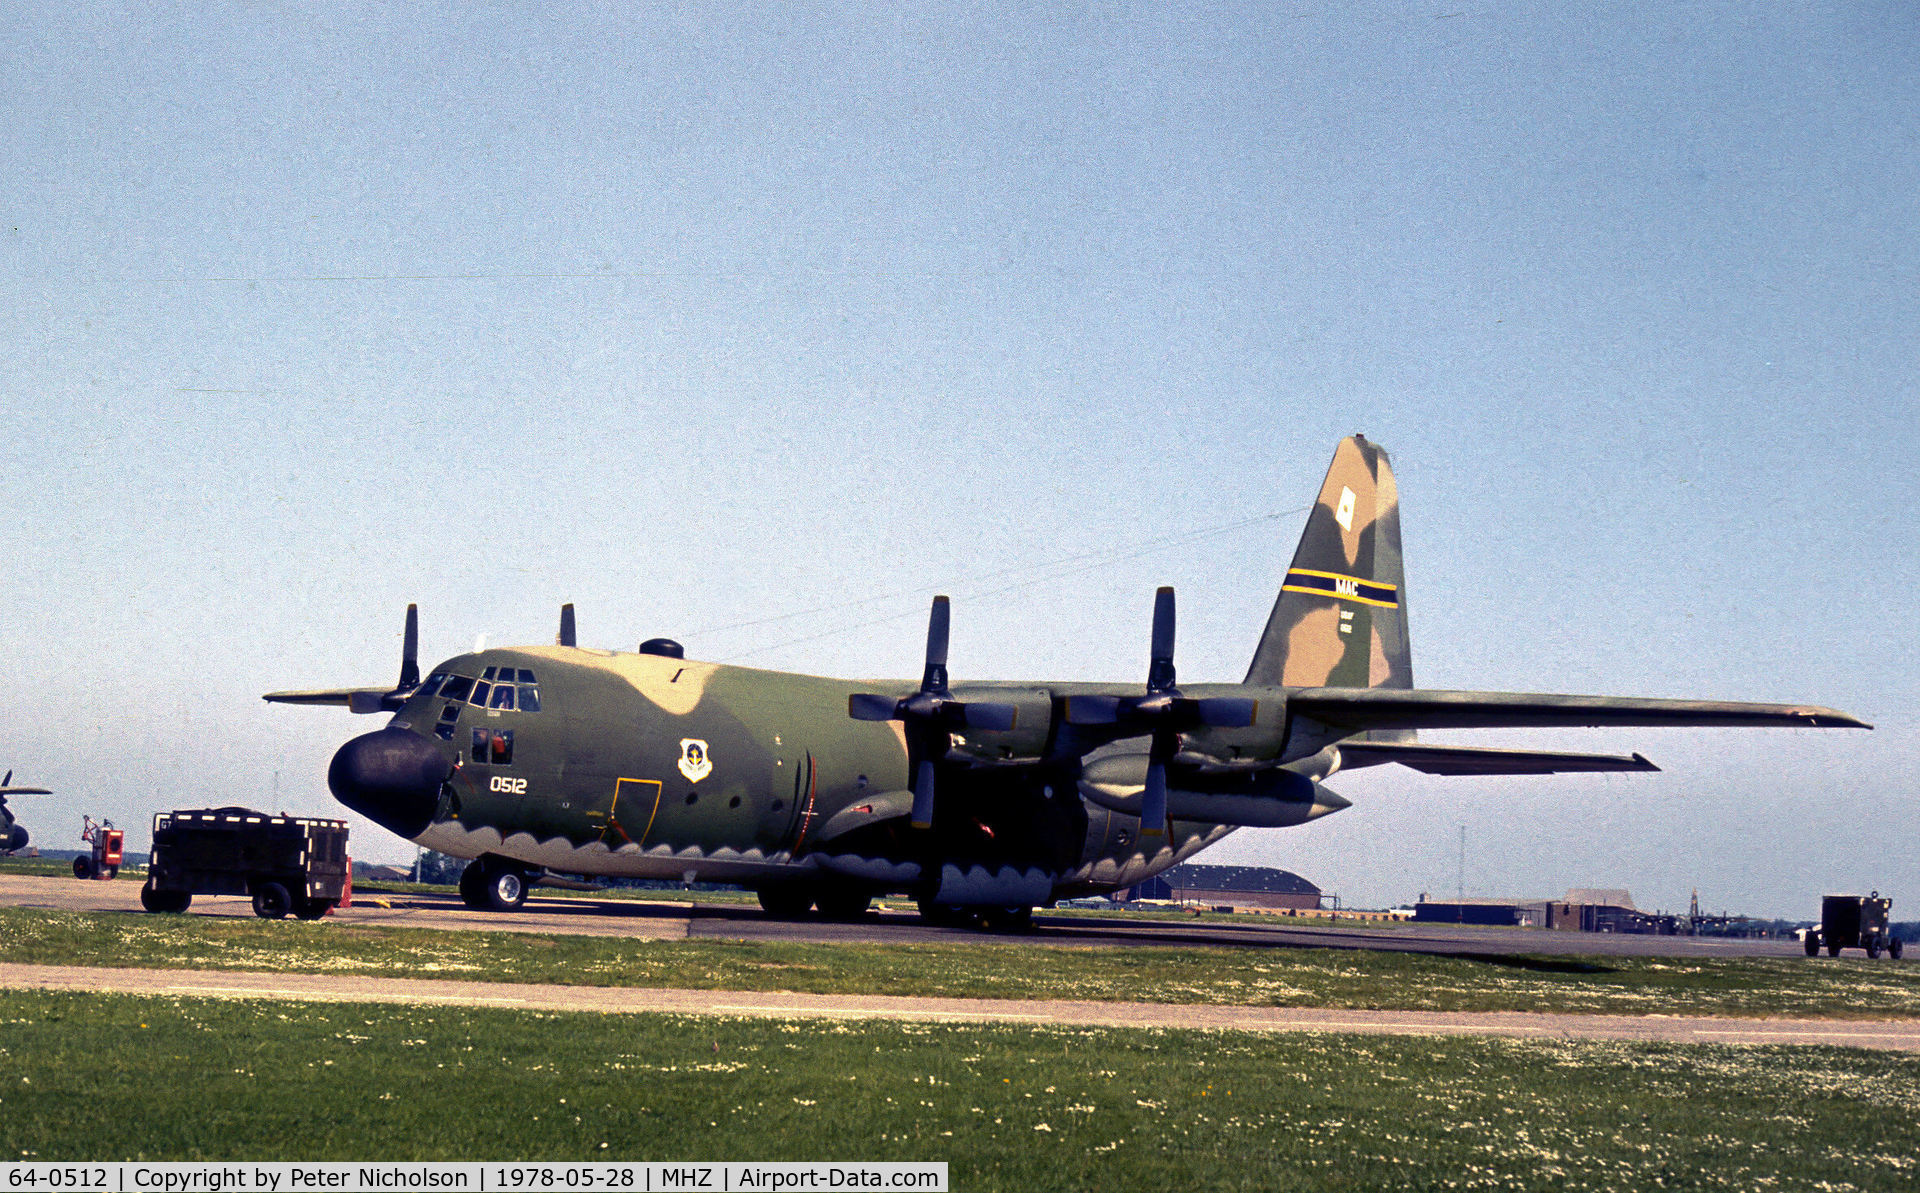 64-0512, 1964 Lockheed C-130E-LM Hercules C/N 382-3996, C-130E Hercules of the 62nd Military Airlift Wing as seen at the 1978 RAF Mildenhall Air Fete.